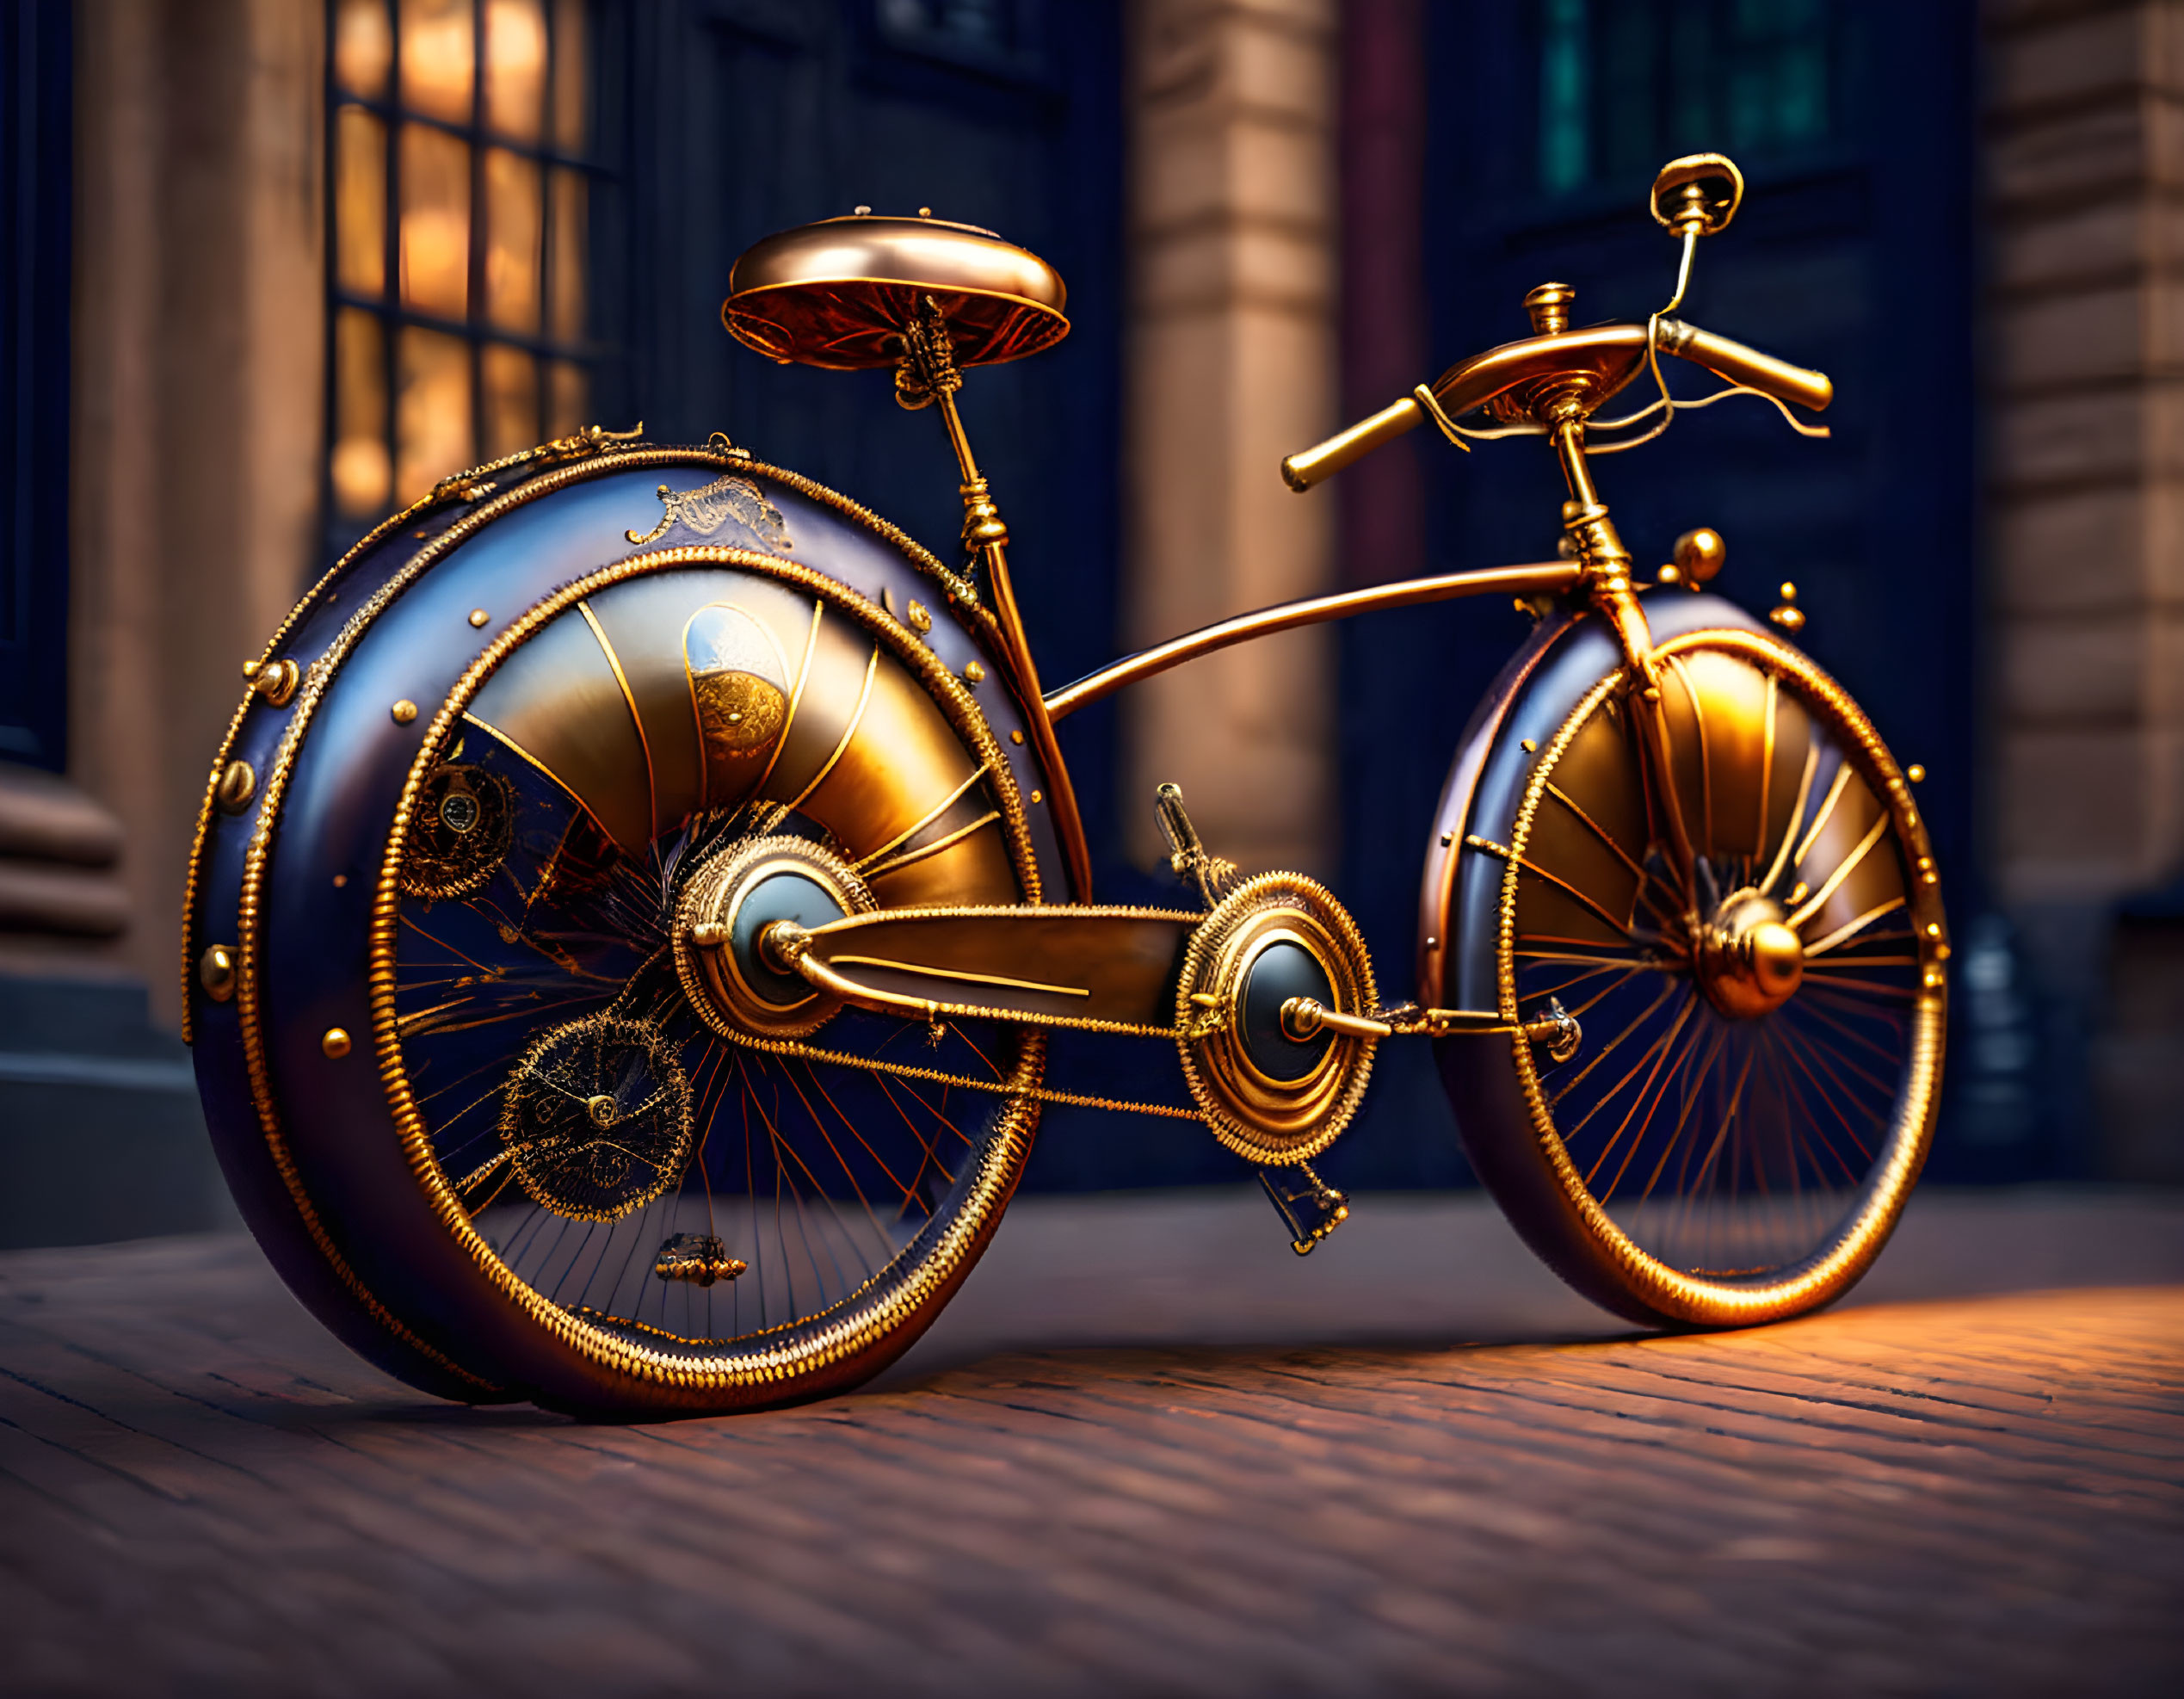 Steampunk bicycle